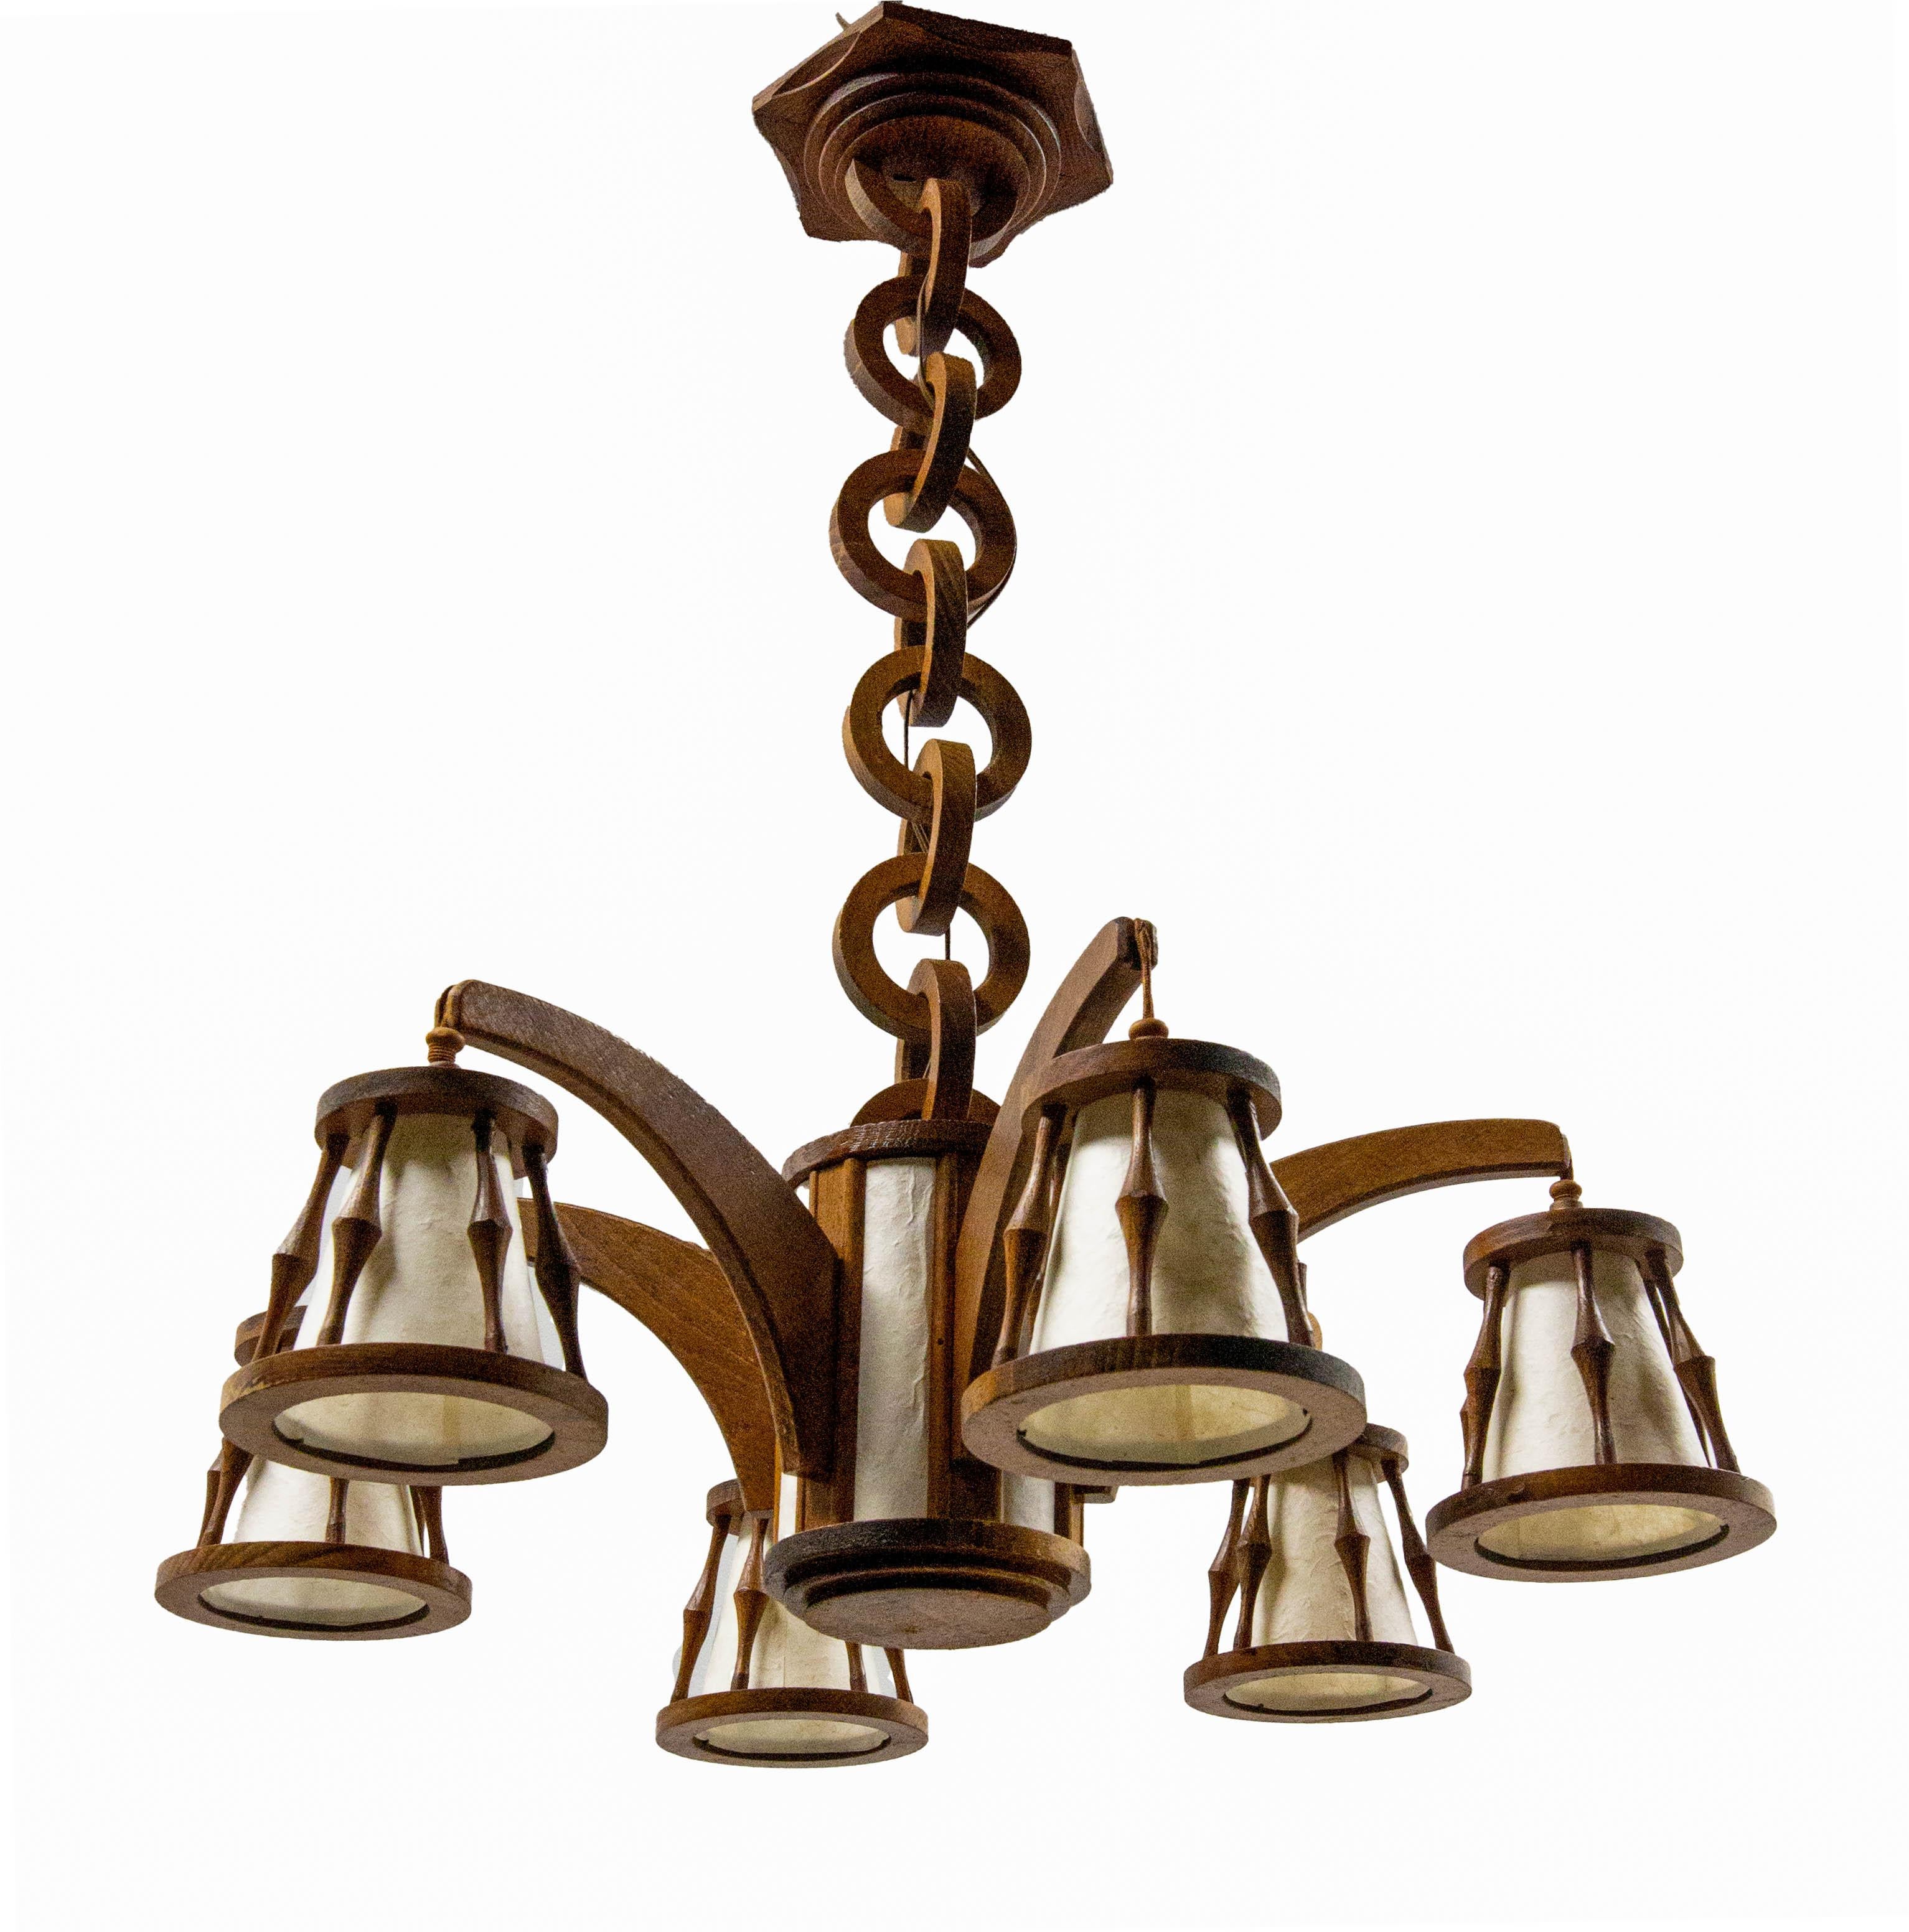 Mid-Century Modern French Beech Chandelier Ceiling Pendant with Wooden Chain, circa 1940